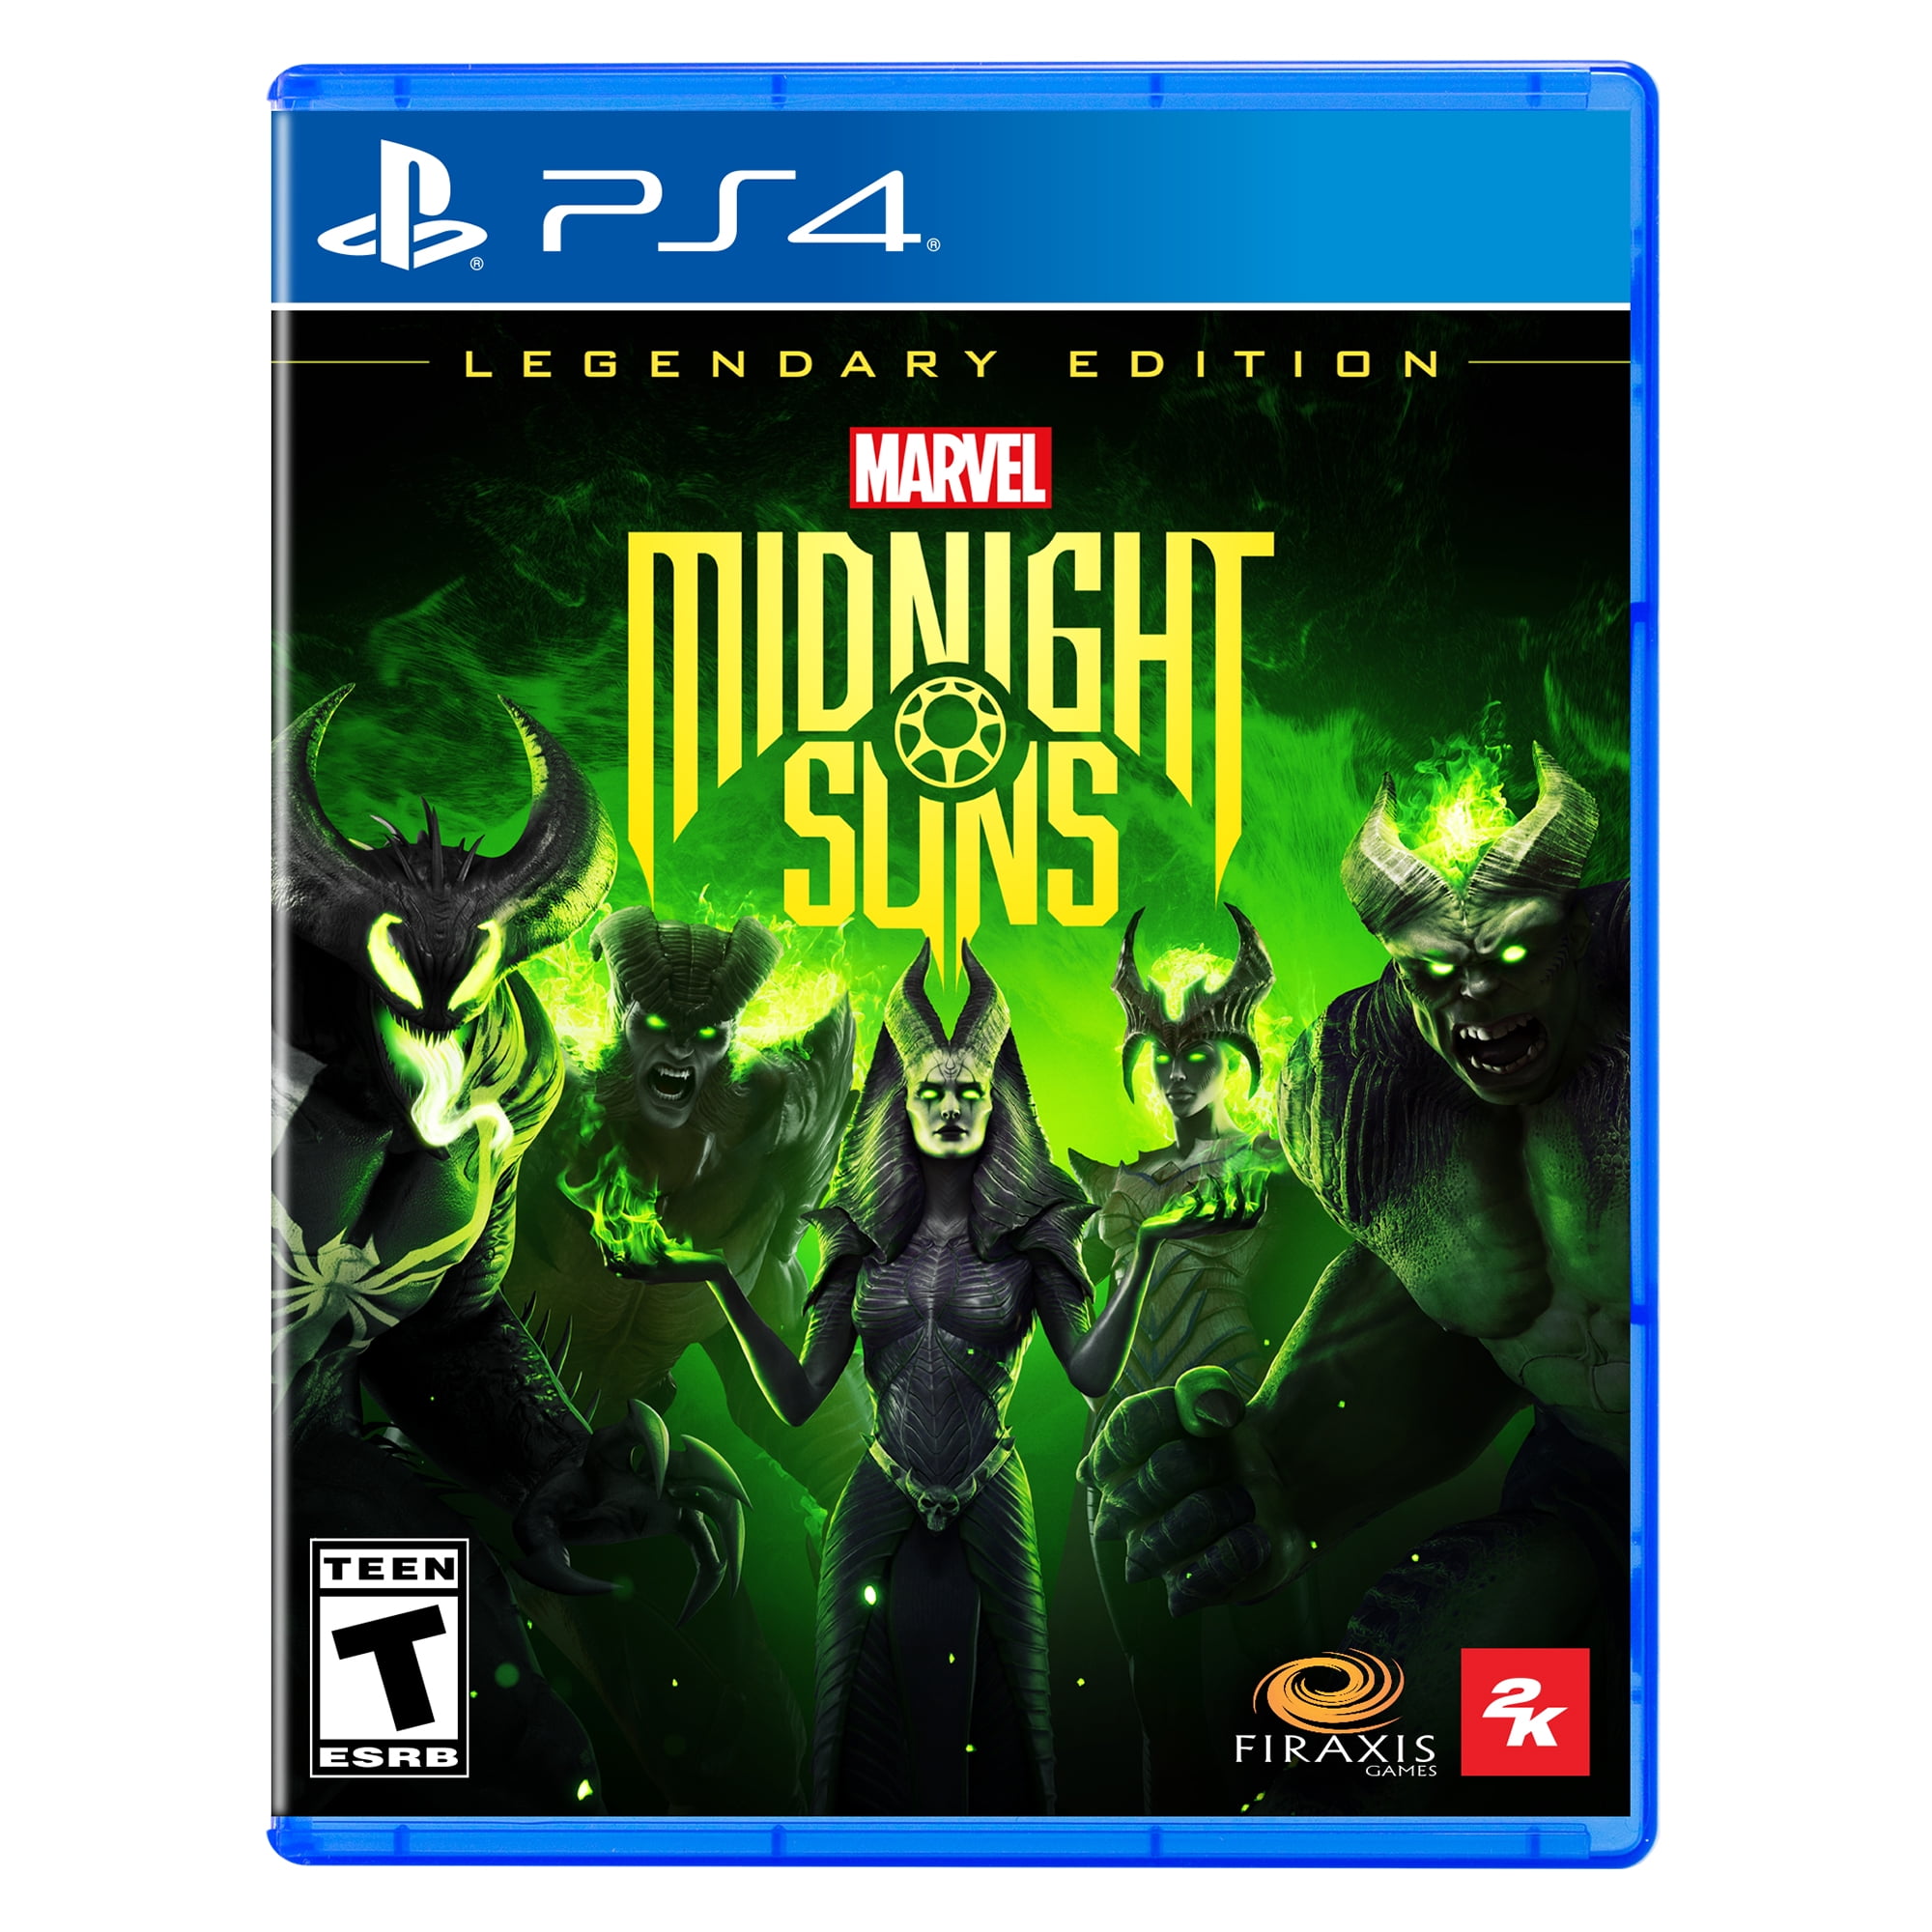 Marvel's Midnight Suns Digital+ Edition | Download and Buy Today - Epic  Games Store